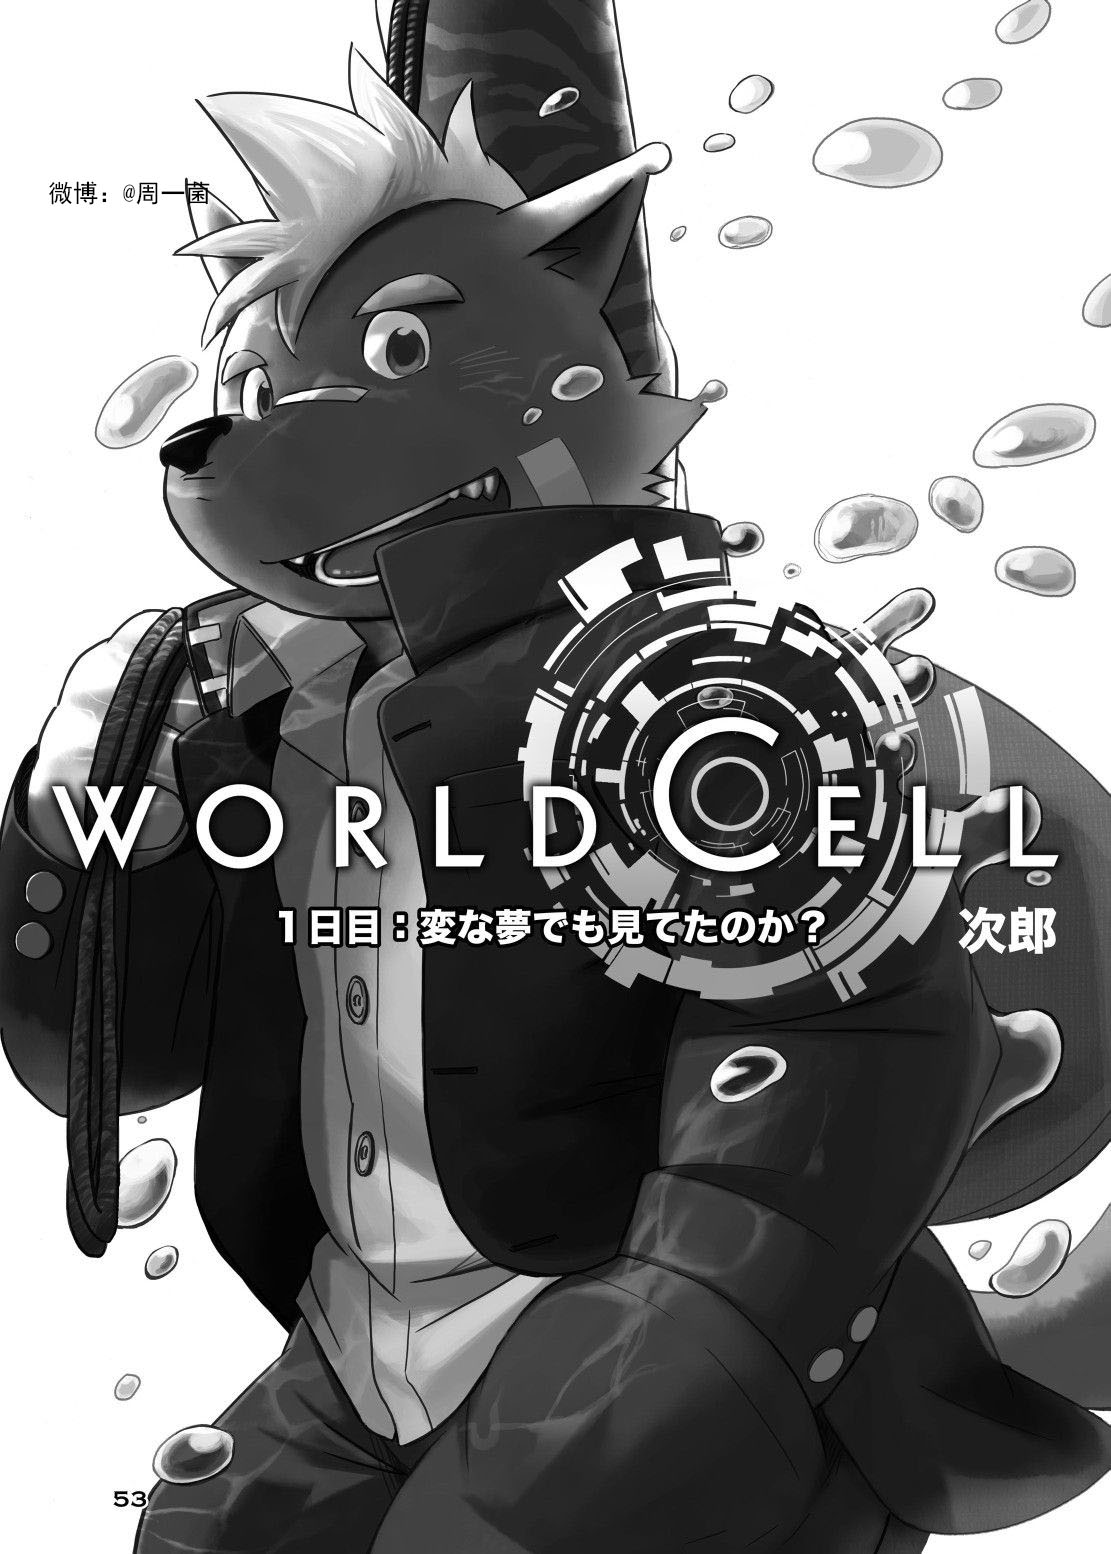 (Fur-st 3) [FCLG (Jiroh)] WORLD CELL (COWPER! vol.RED) [Chinese] (ふぁーすと3) [フクラグ (次郎)] WORLD CELL (カウパー! vol.RED) [中国翻訳]